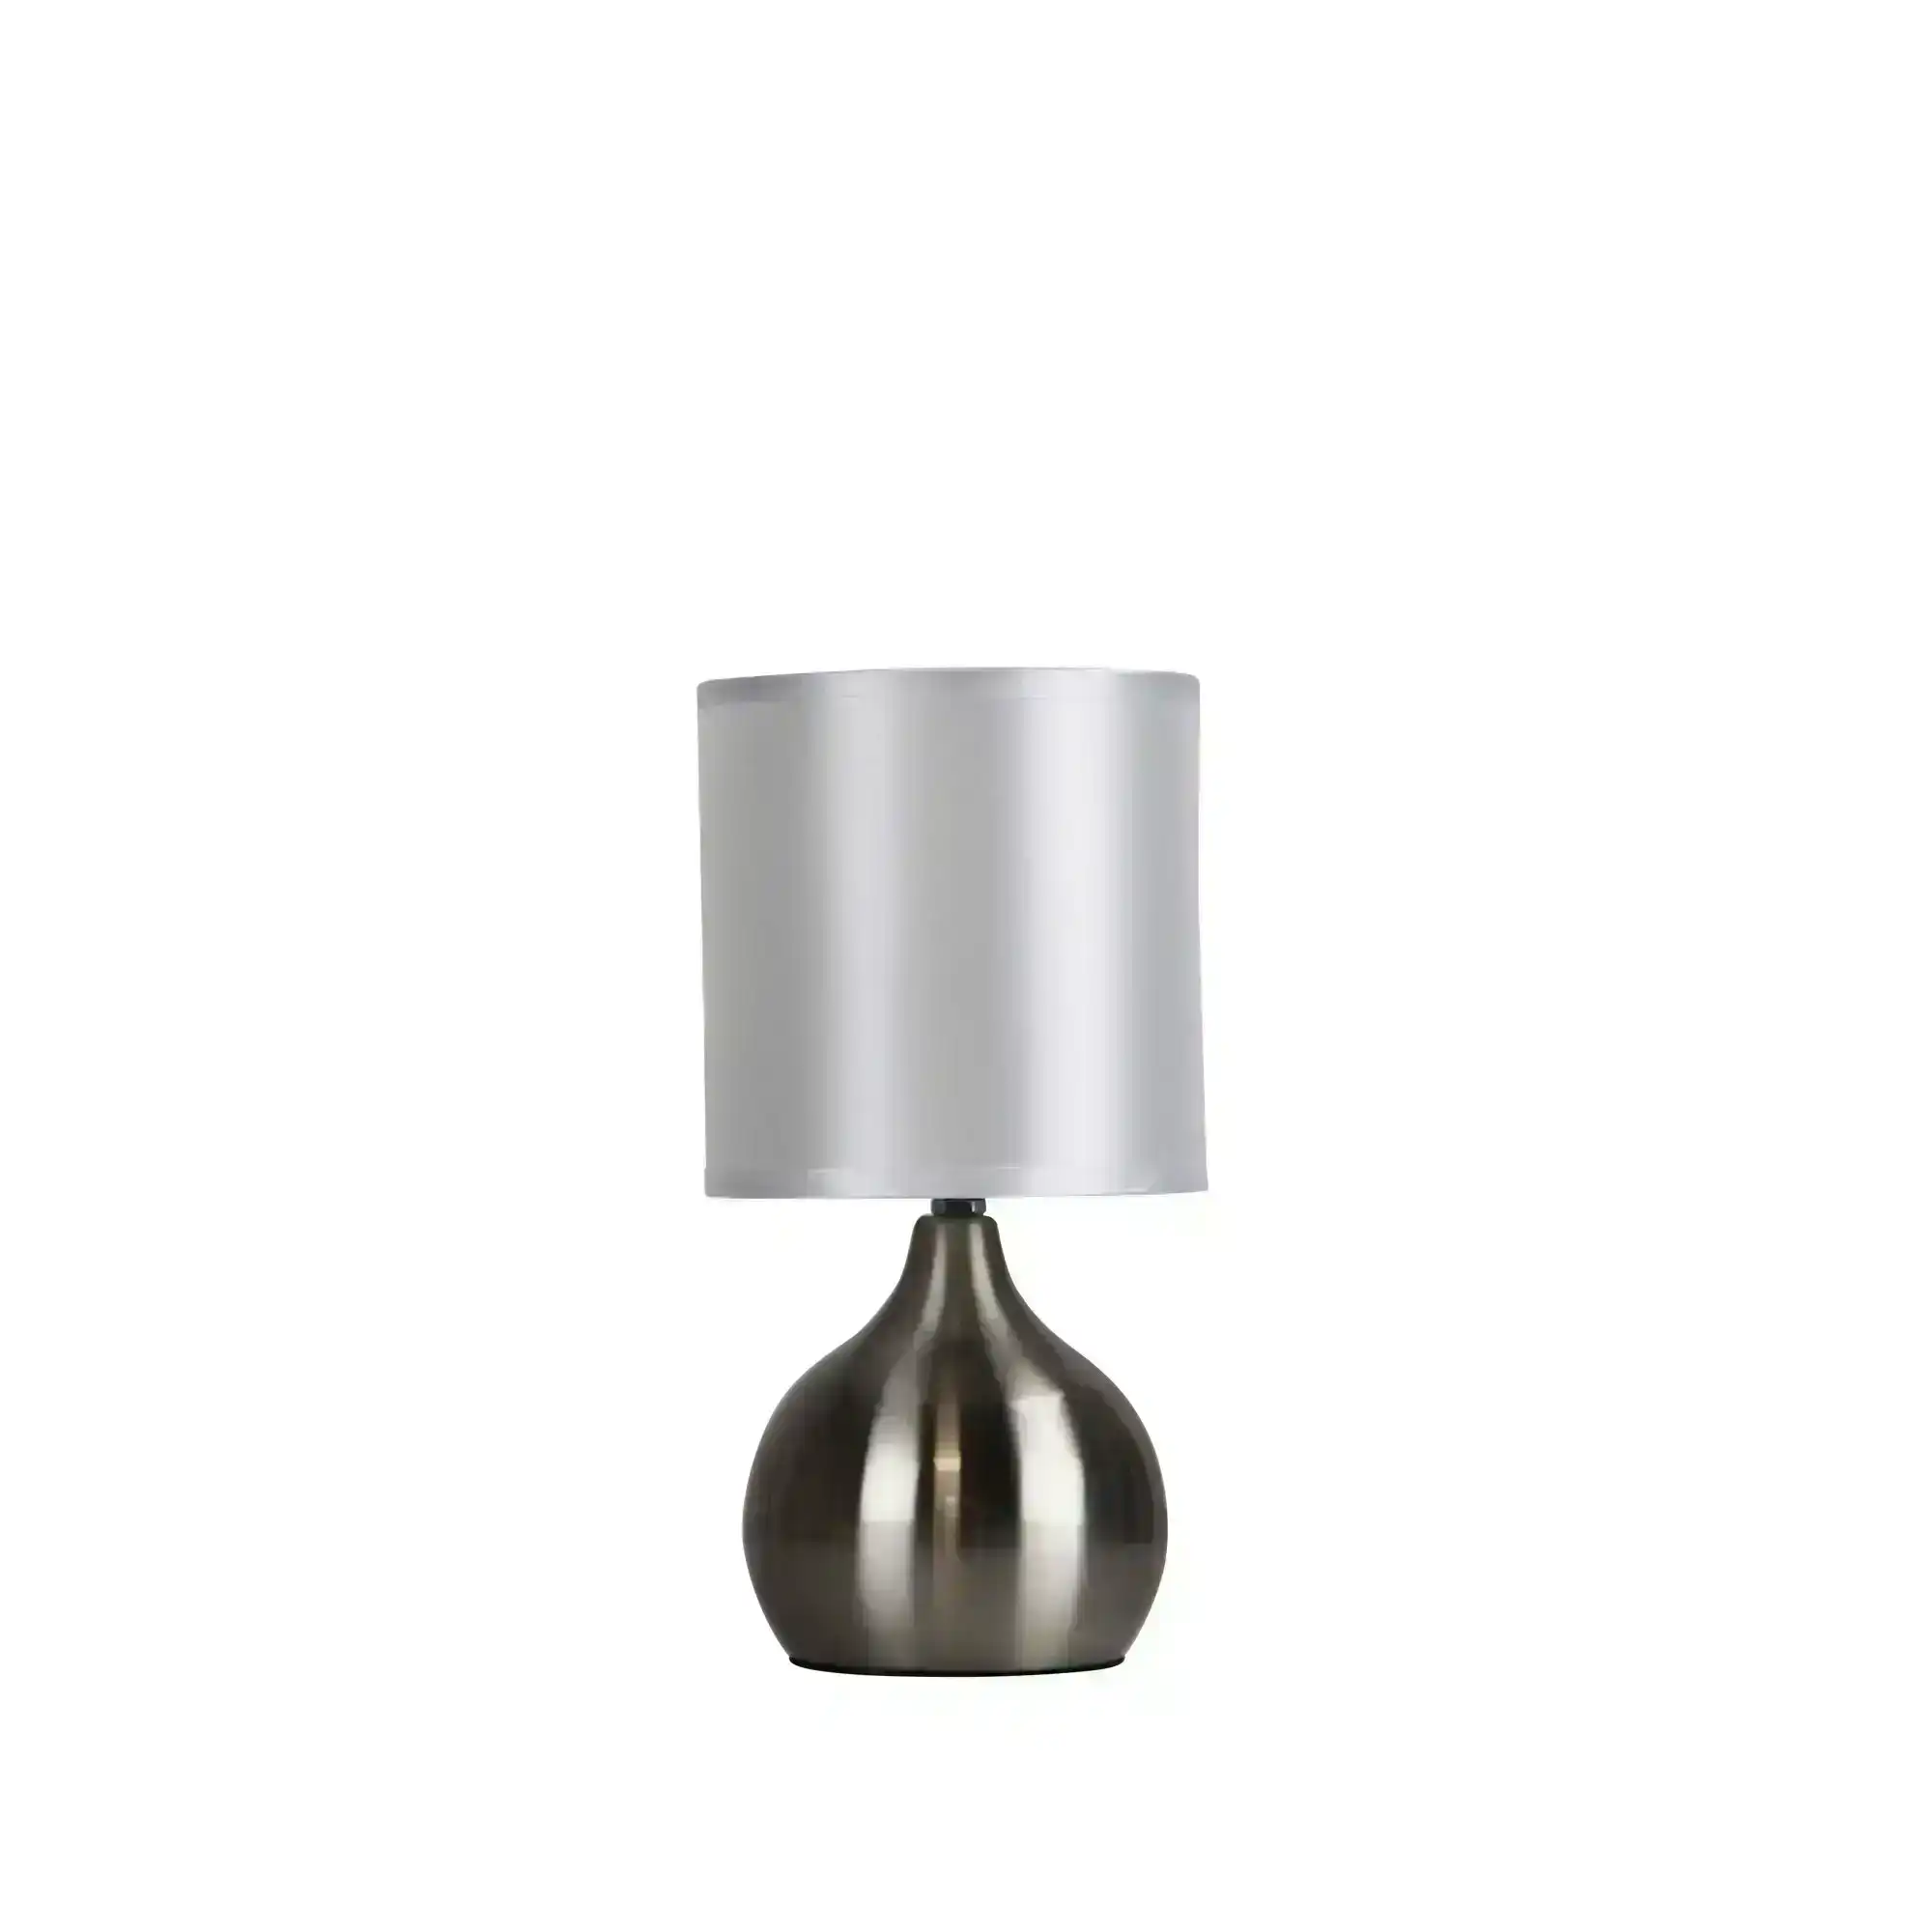 LOTTI ON / OFF Touch Lamp Brushed Chrome Finish